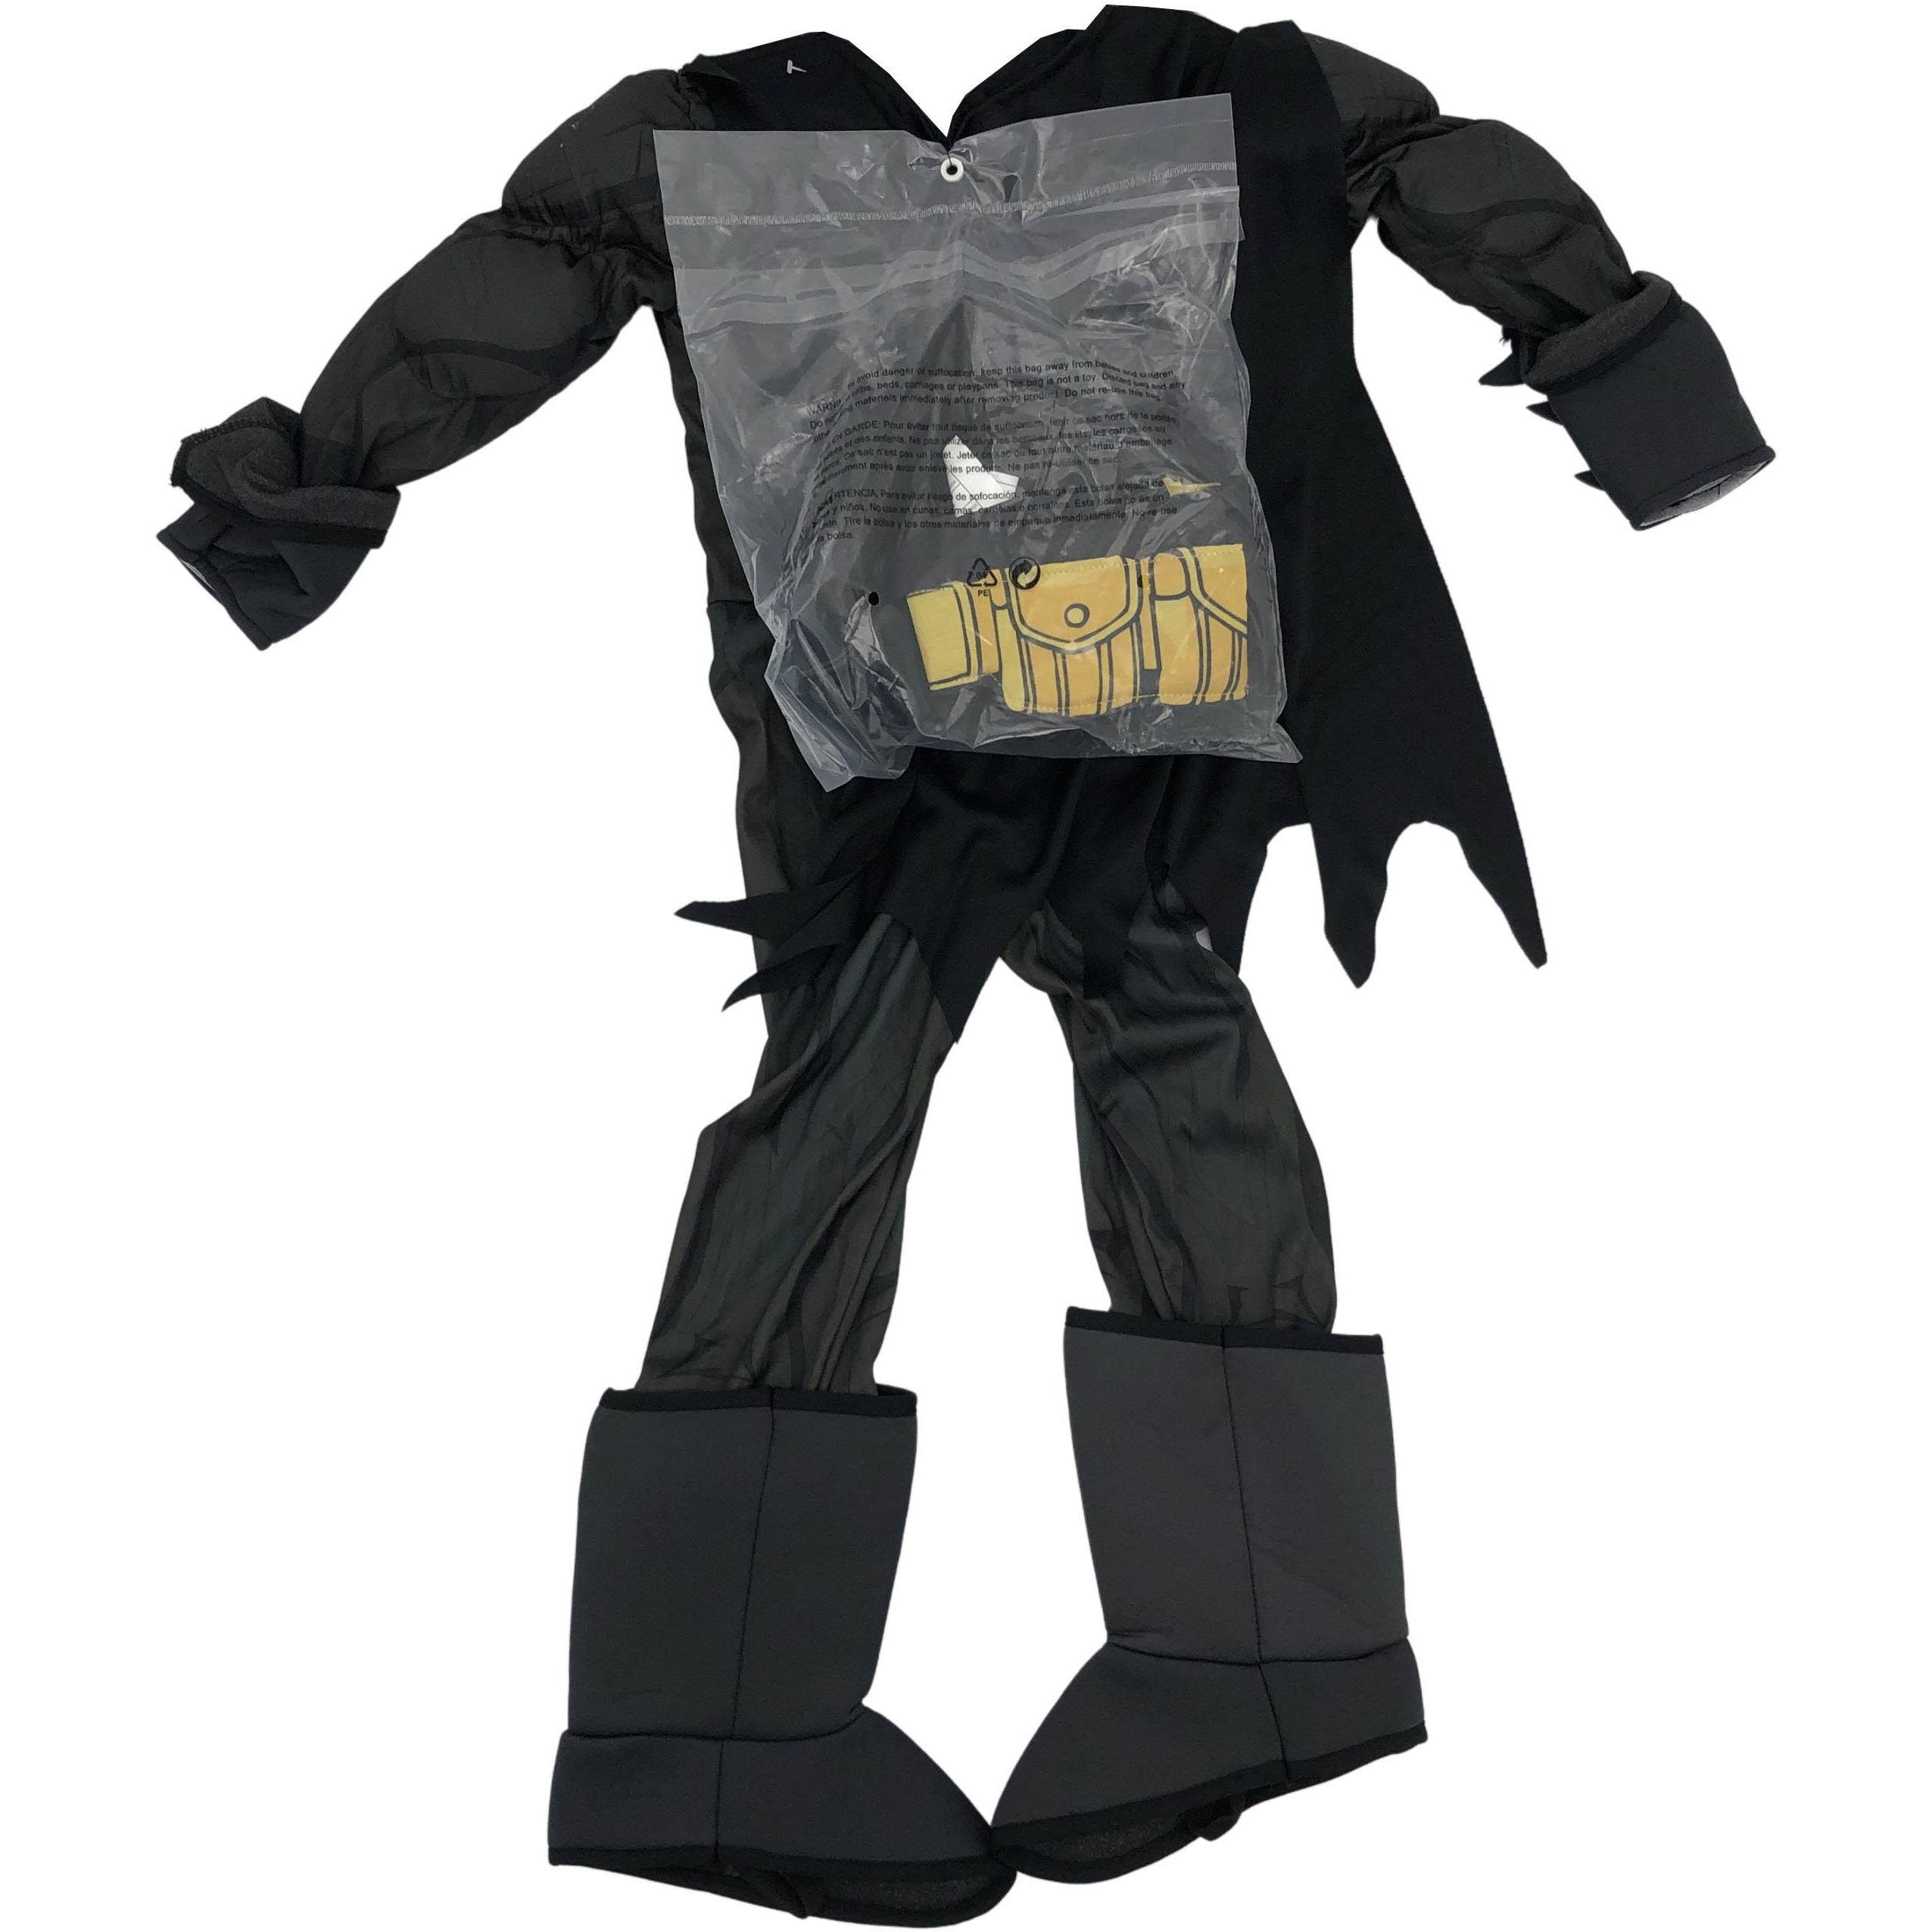 Rubies Classic Batman Halloween Costume in Sizes 3-4 5-6 and 7-8